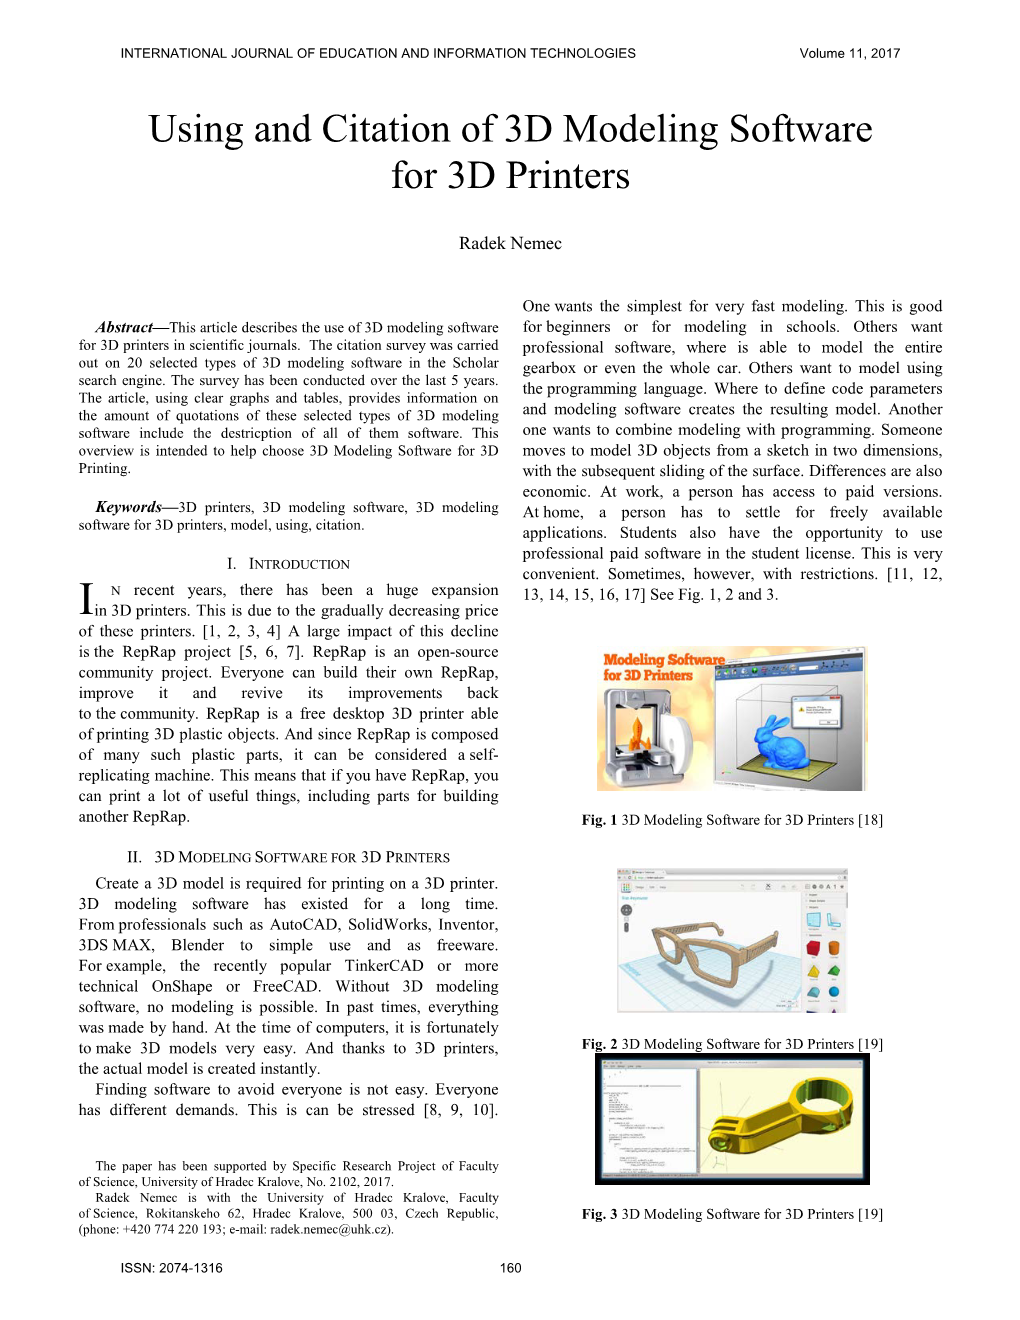 Using and Citation of 3D Modeling Software for 3D Printers